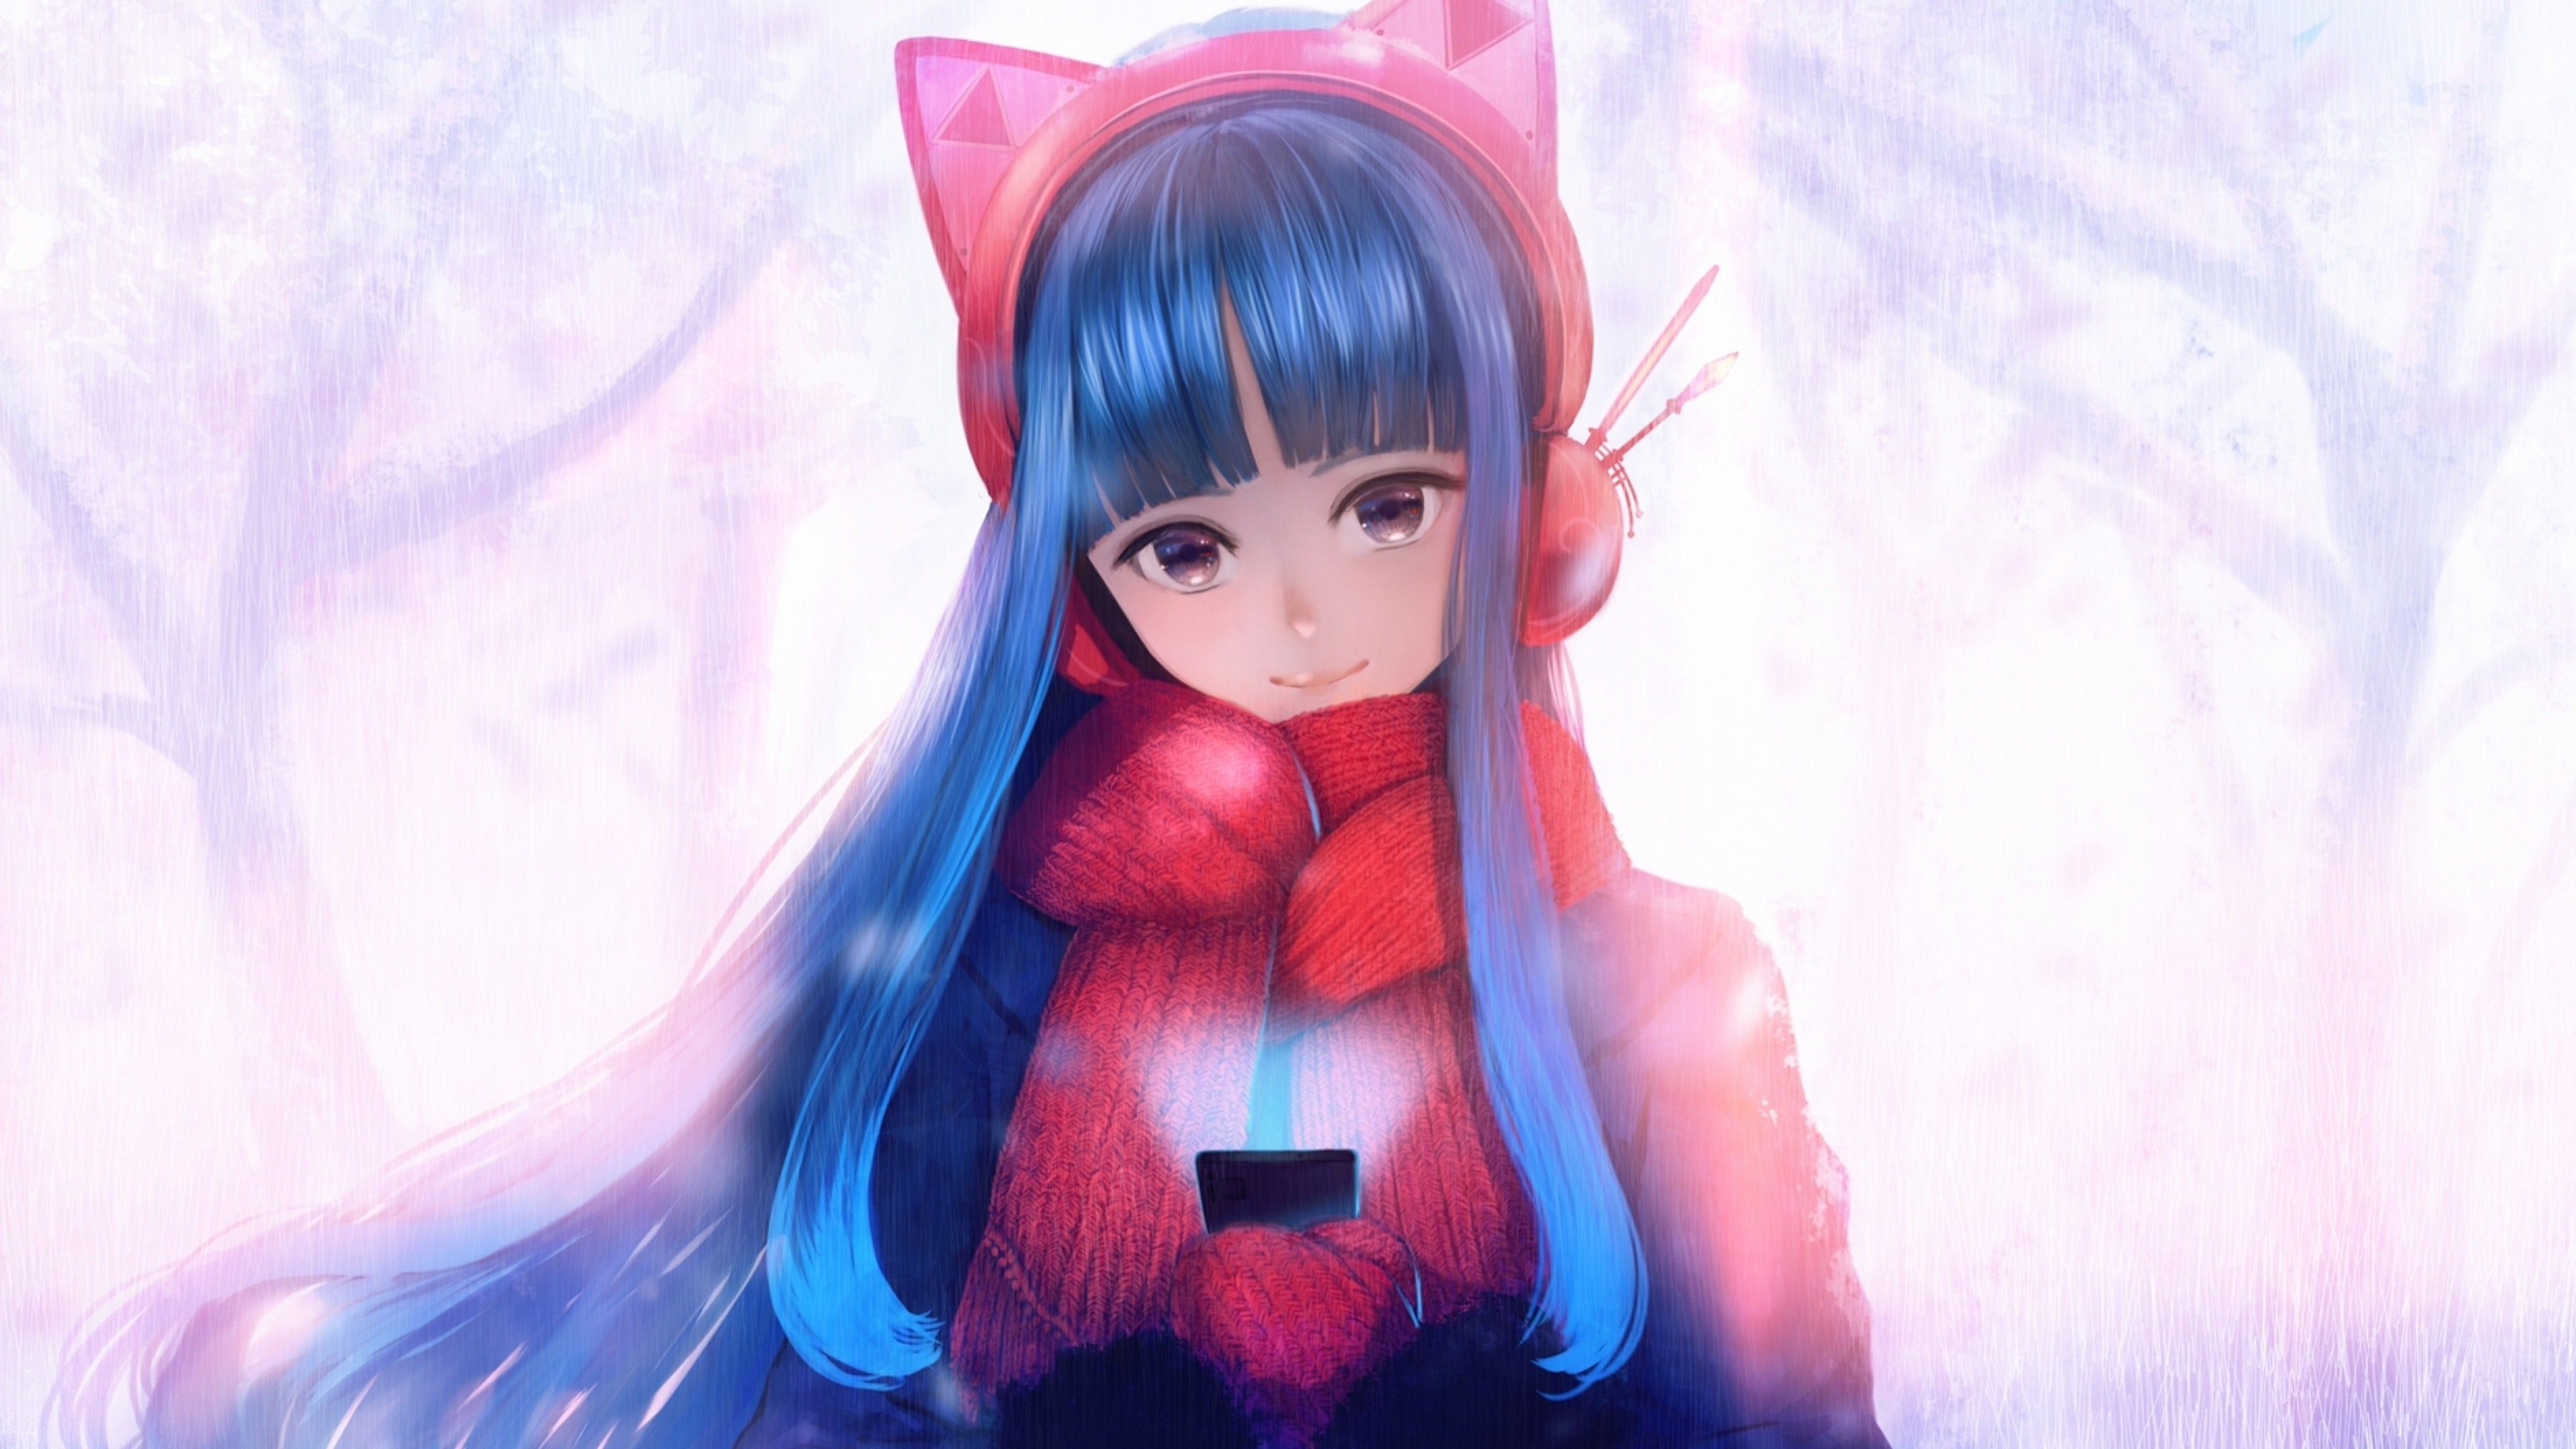 Download 3840x2160 Anime Girl, Cold, Winter, Scarf, Headphones, Blue Hair, Smiling Wallpaper for UHD TV